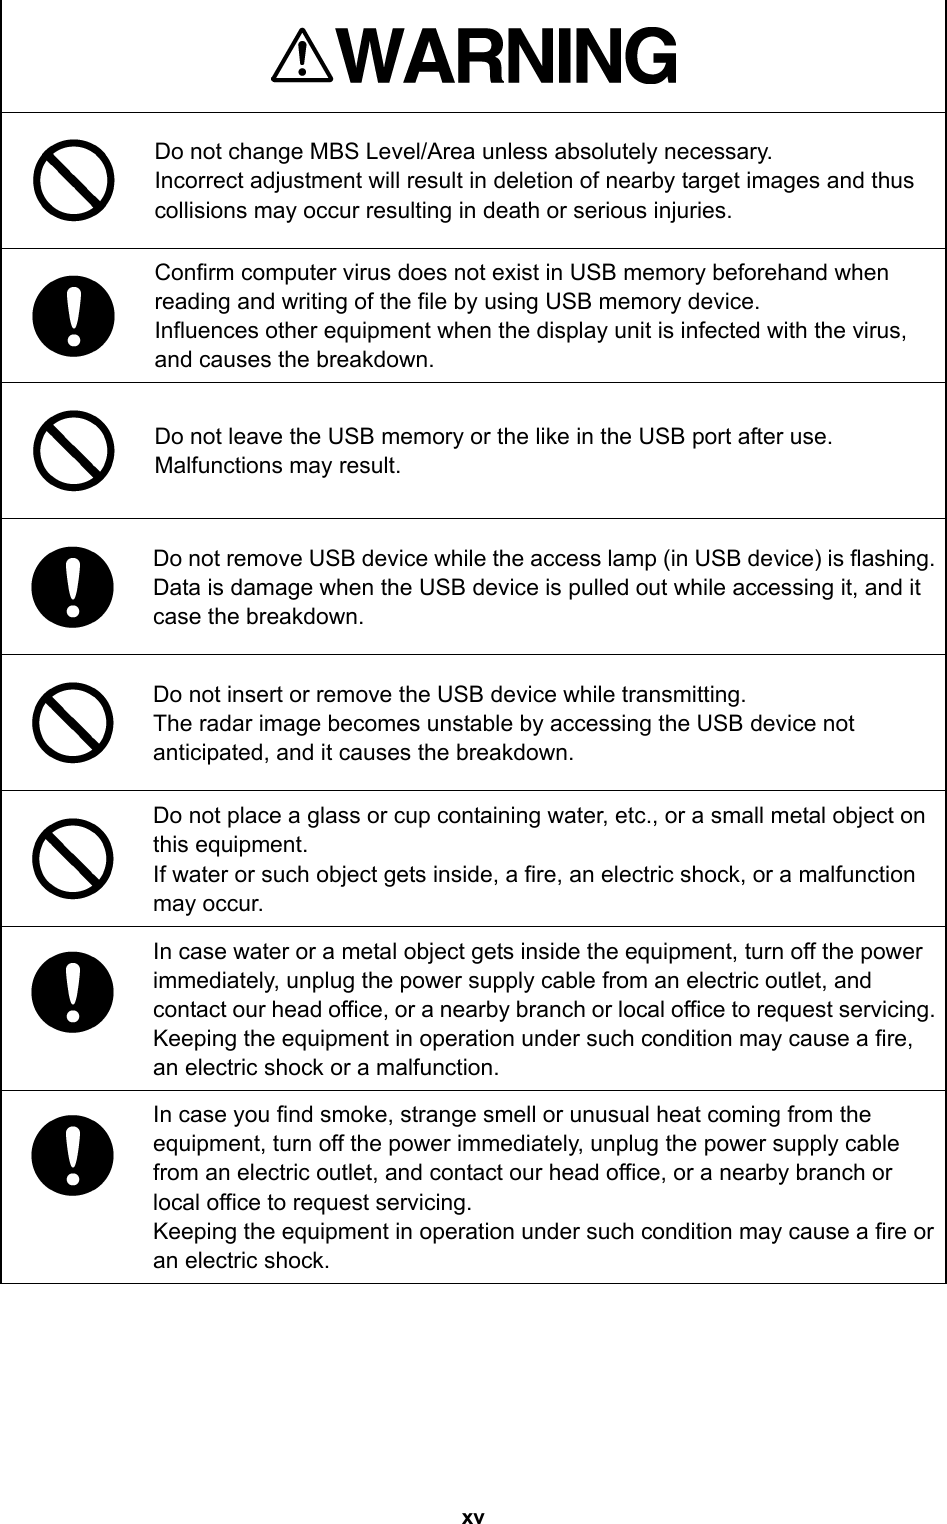  xv     Do not change MBS Level/Area unless absolutely necessary. Incorrect adjustment will result in deletion of nearby target images and thus collisions may occur resulting in death or serious injuries.  Confirm computer virus does not exist in USB memory beforehand when reading and writing of the file by using USB memory device. Influences other equipment when the display unit is infected with the virus, and causes the breakdown.  Do not leave the USB memory or the like in the USB port after use. Malfunctions may result.  Do not remove USB device while the access lamp (in USB device) is flashing.Data is damage when the USB device is pulled out while accessing it, and it case the breakdown.  Do not insert or remove the USB device while transmitting. The radar image becomes unstable by accessing the USB device not anticipated, and it causes the breakdown.  Do not place a glass or cup containing water, etc., or a small metal object on this equipment. If water or such object gets inside, a fire, an electric shock, or a malfunction may occur.  In case water or a metal object gets inside the equipment, turn off the power immediately, unplug the power supply cable from an electric outlet, and contact our head office, or a nearby branch or local office to request servicing.Keeping the equipment in operation under such condition may cause a fire, an electric shock or a malfunction.  In case you find smoke, strange smell or unusual heat coming from the equipment, turn off the power immediately, unplug the power supply cable from an electric outlet, and contact our head office, or a nearby branch or local office to request servicing. Keeping the equipment in operation under such condition may cause a fire or an electric shock. 